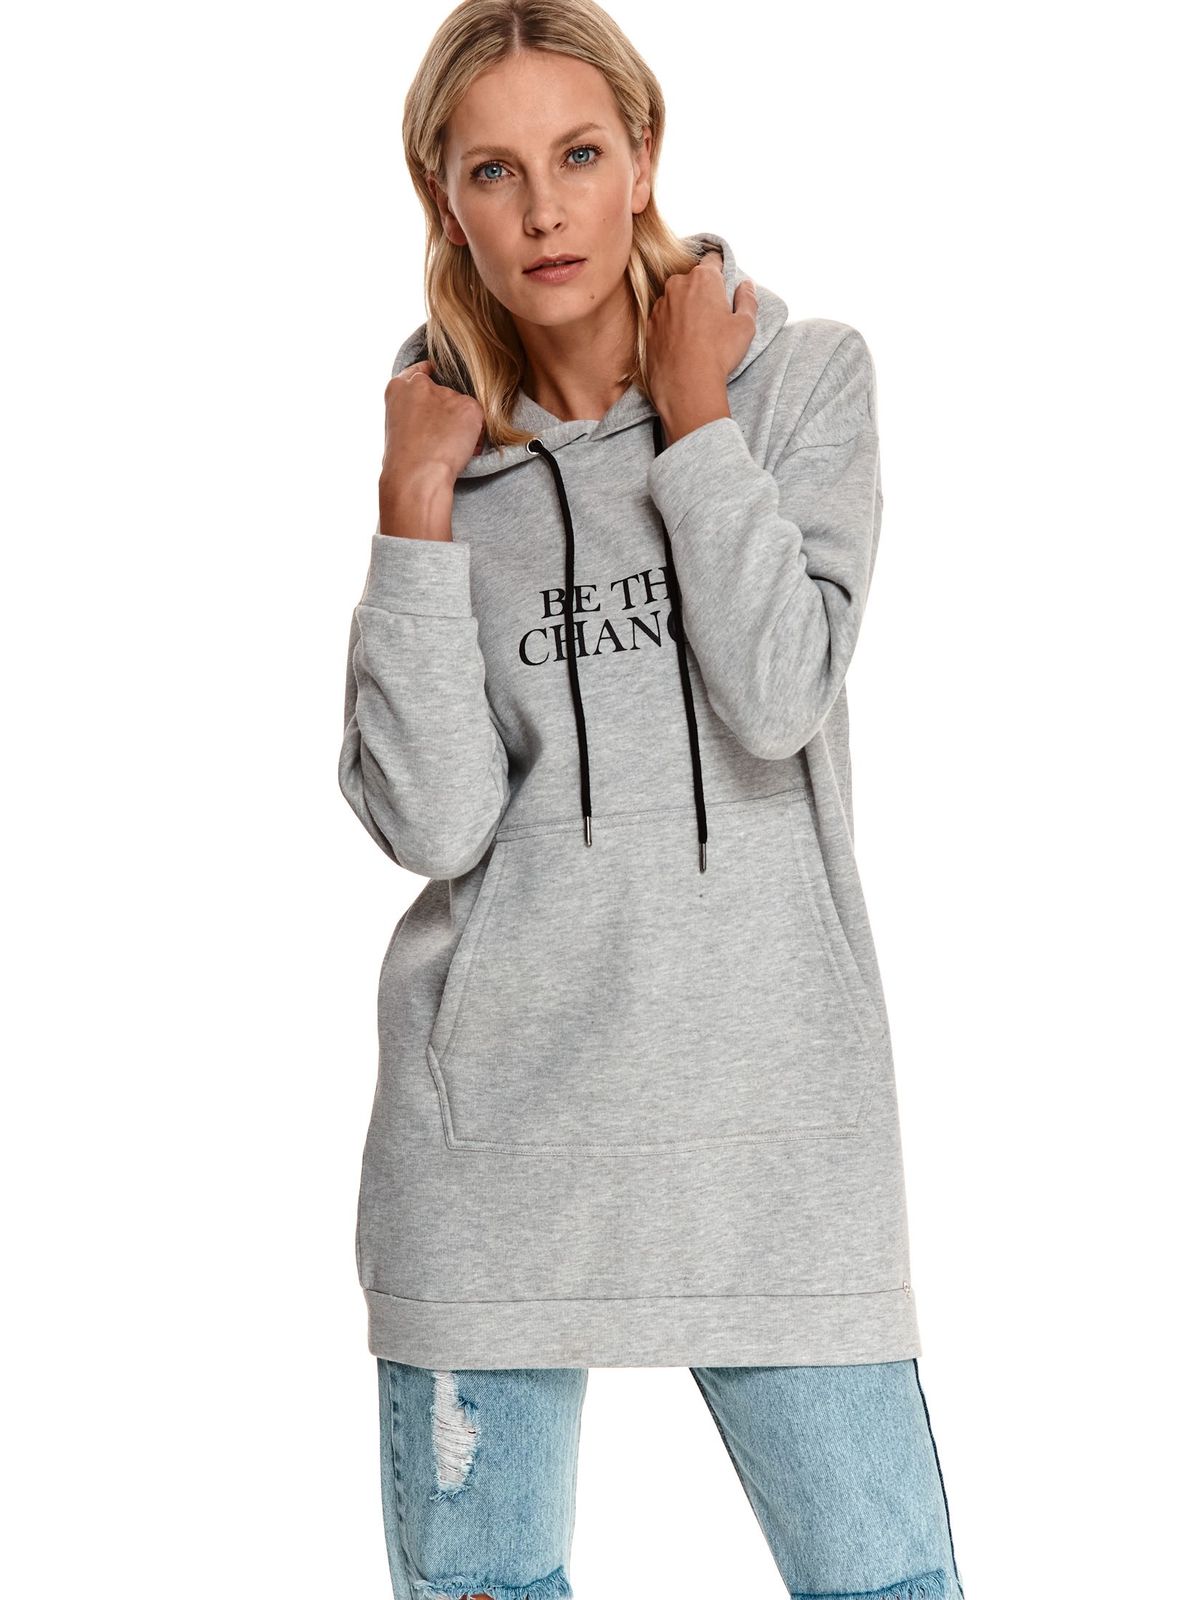 Lightgrey women`s blouse cotton loose fit with undetachable hood